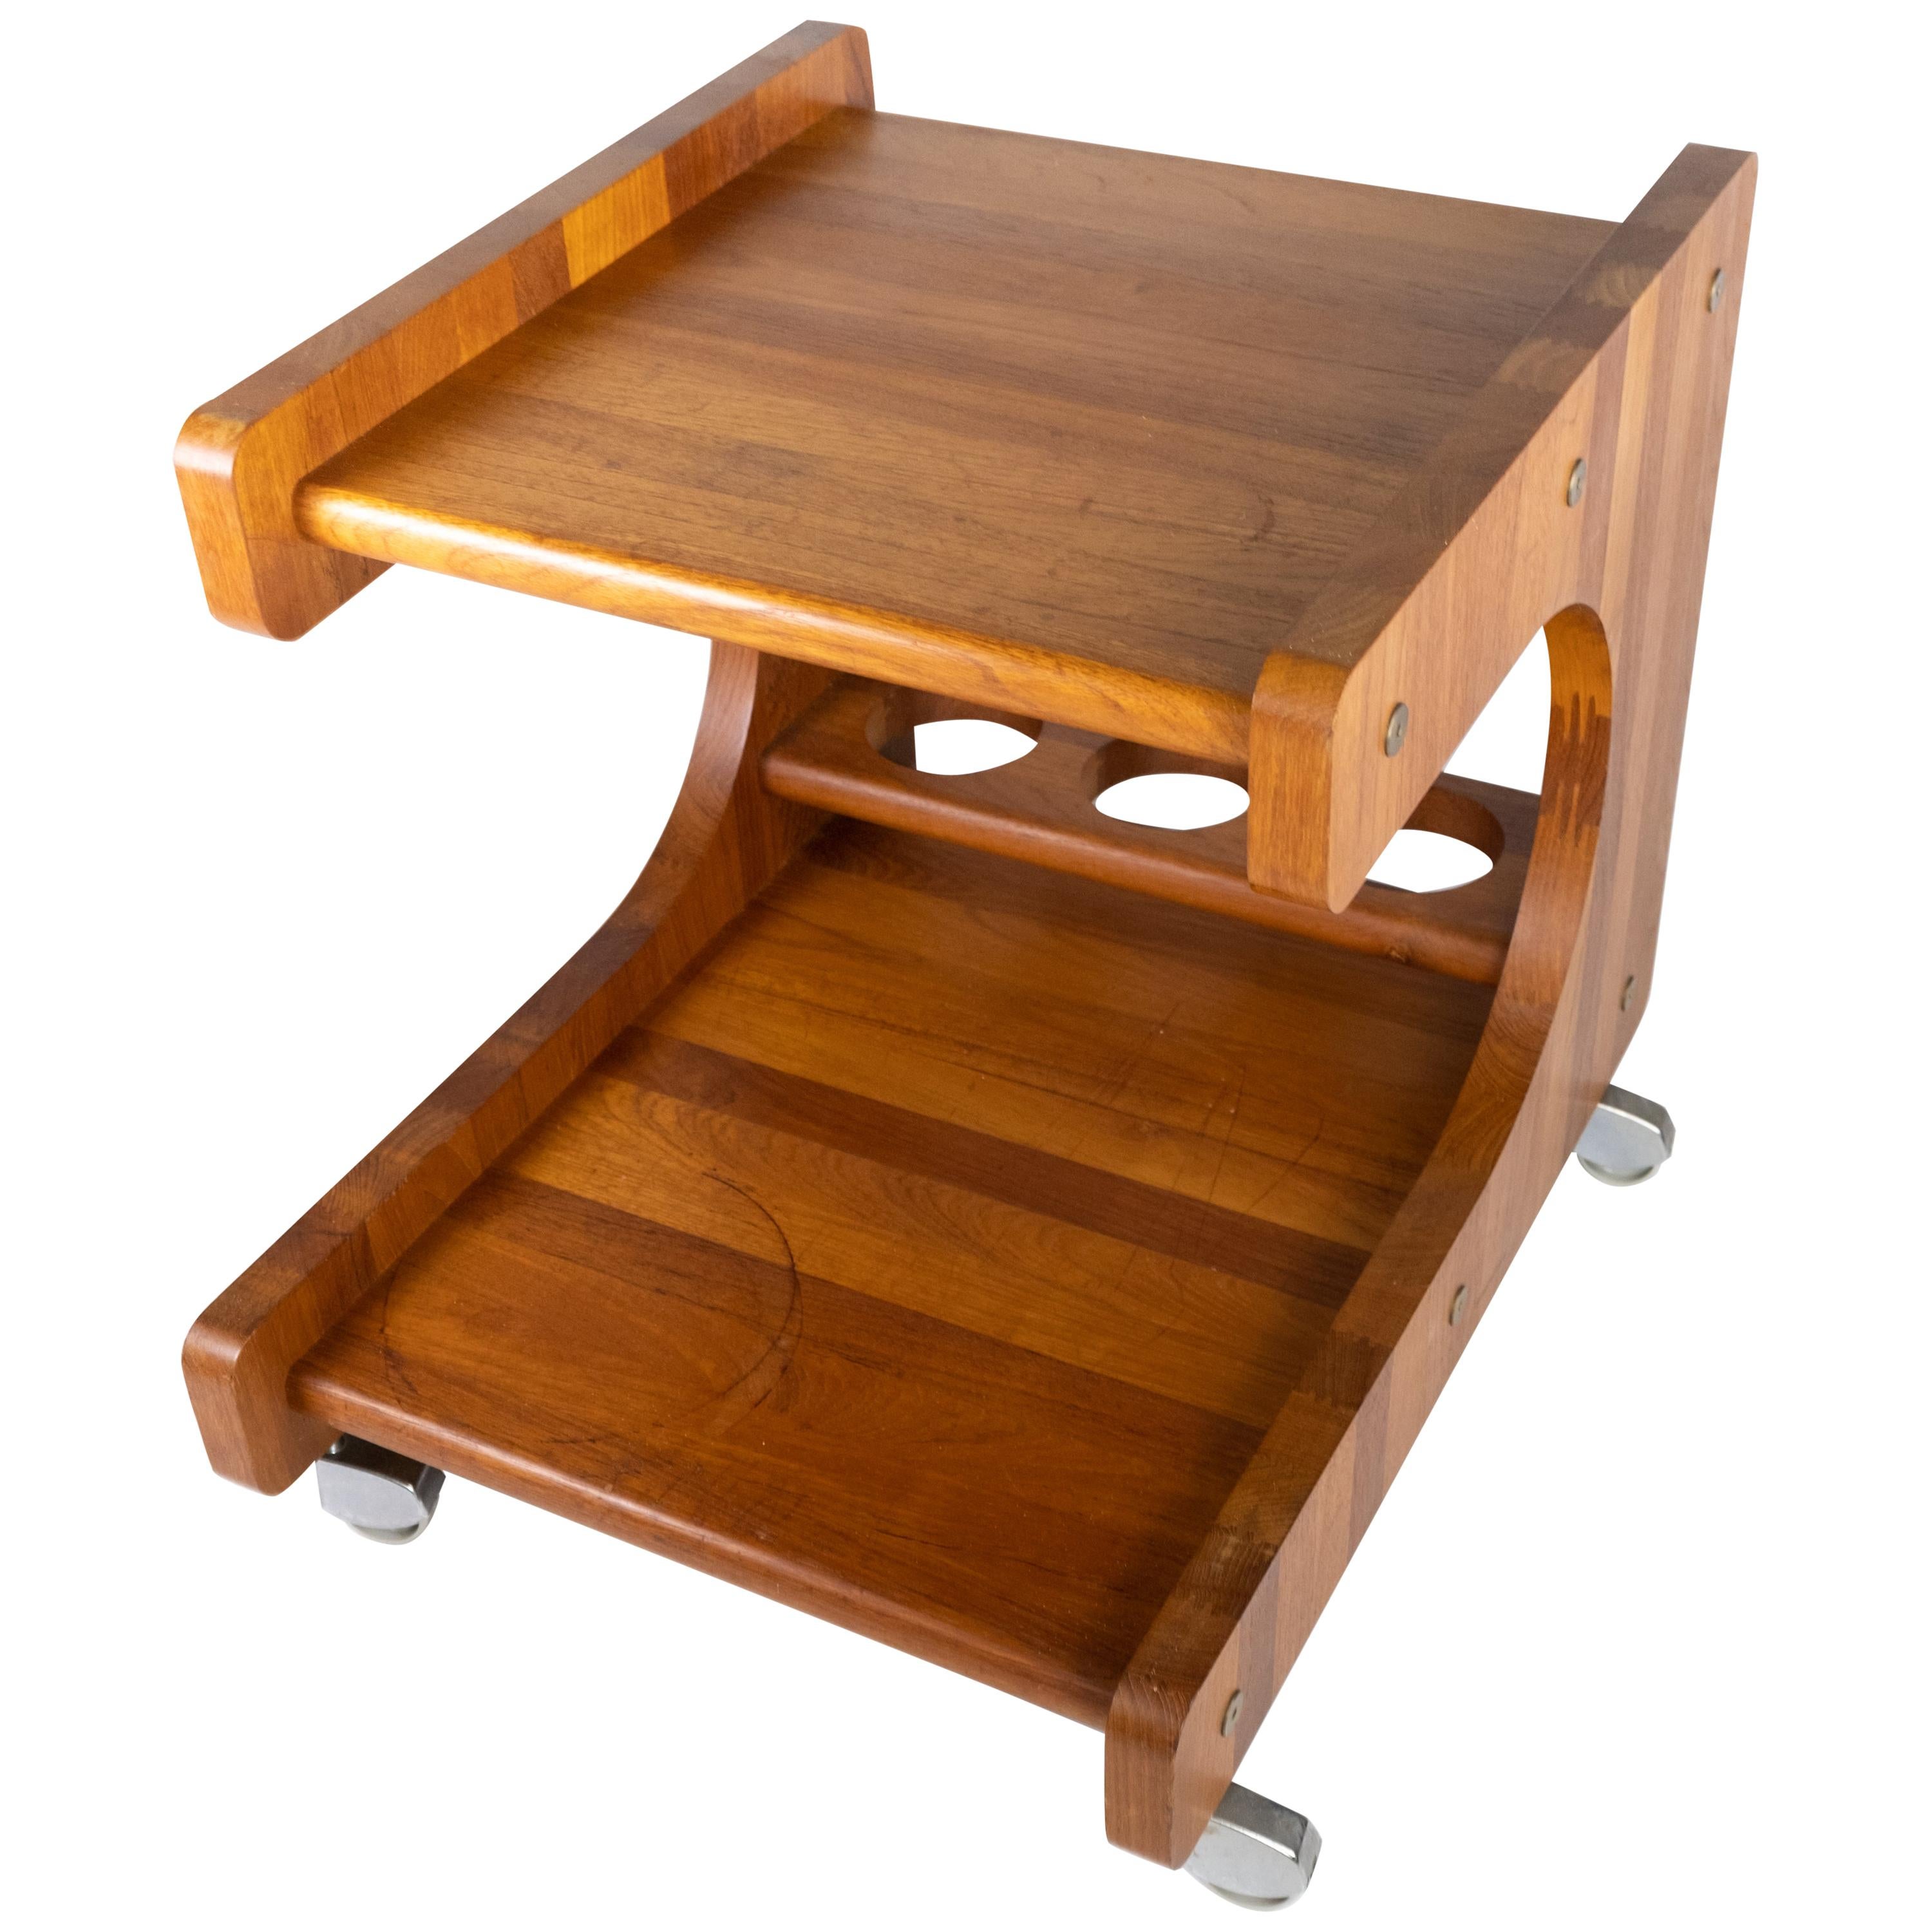 Smaller Tray Table or Bar Cart in Teak of Danish Design from the 1960s